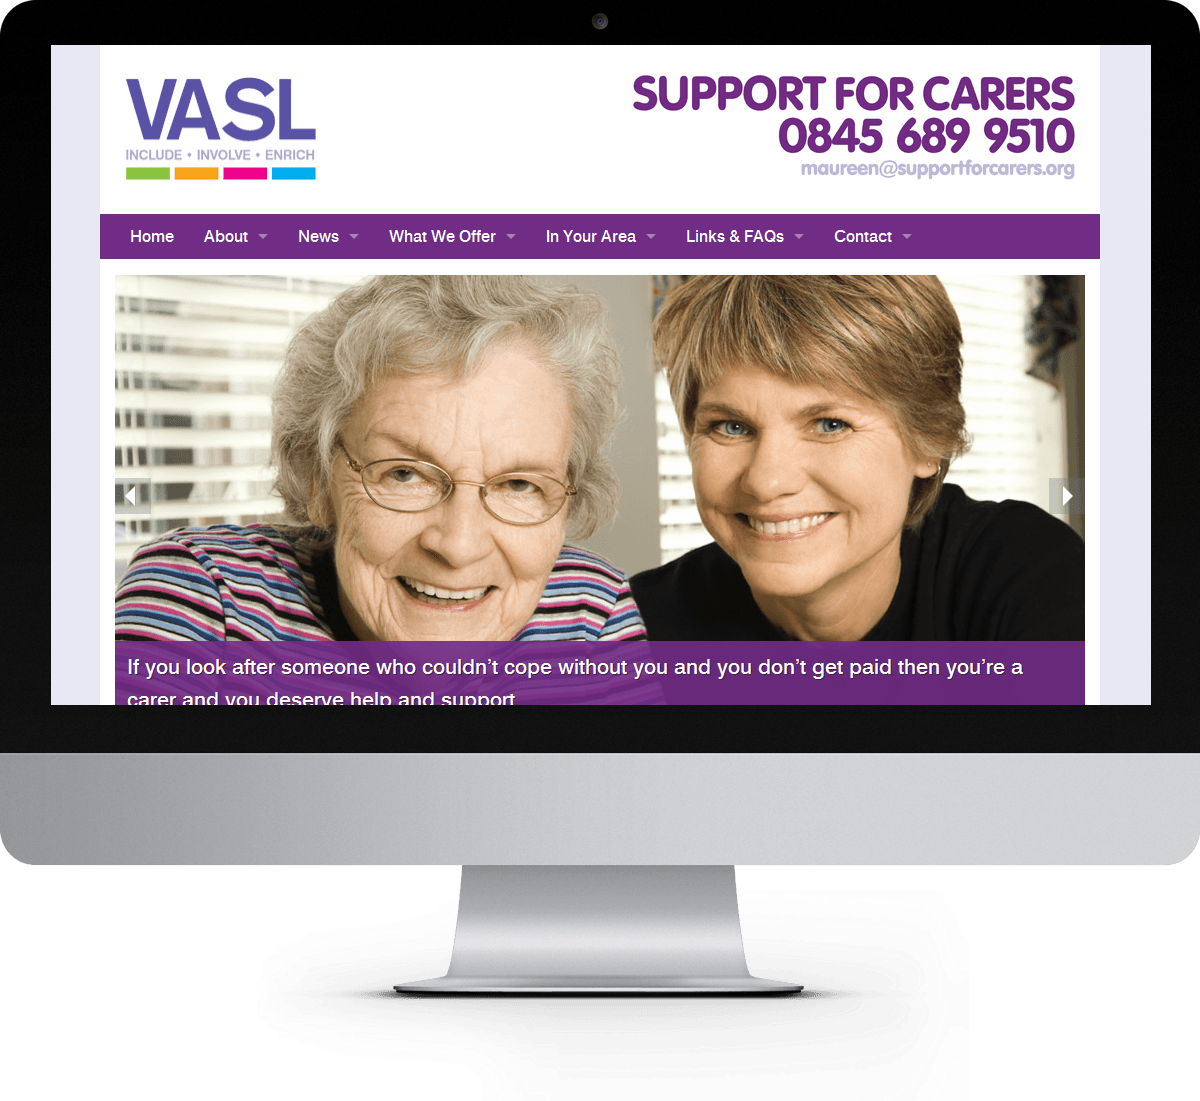 Support for Carers website